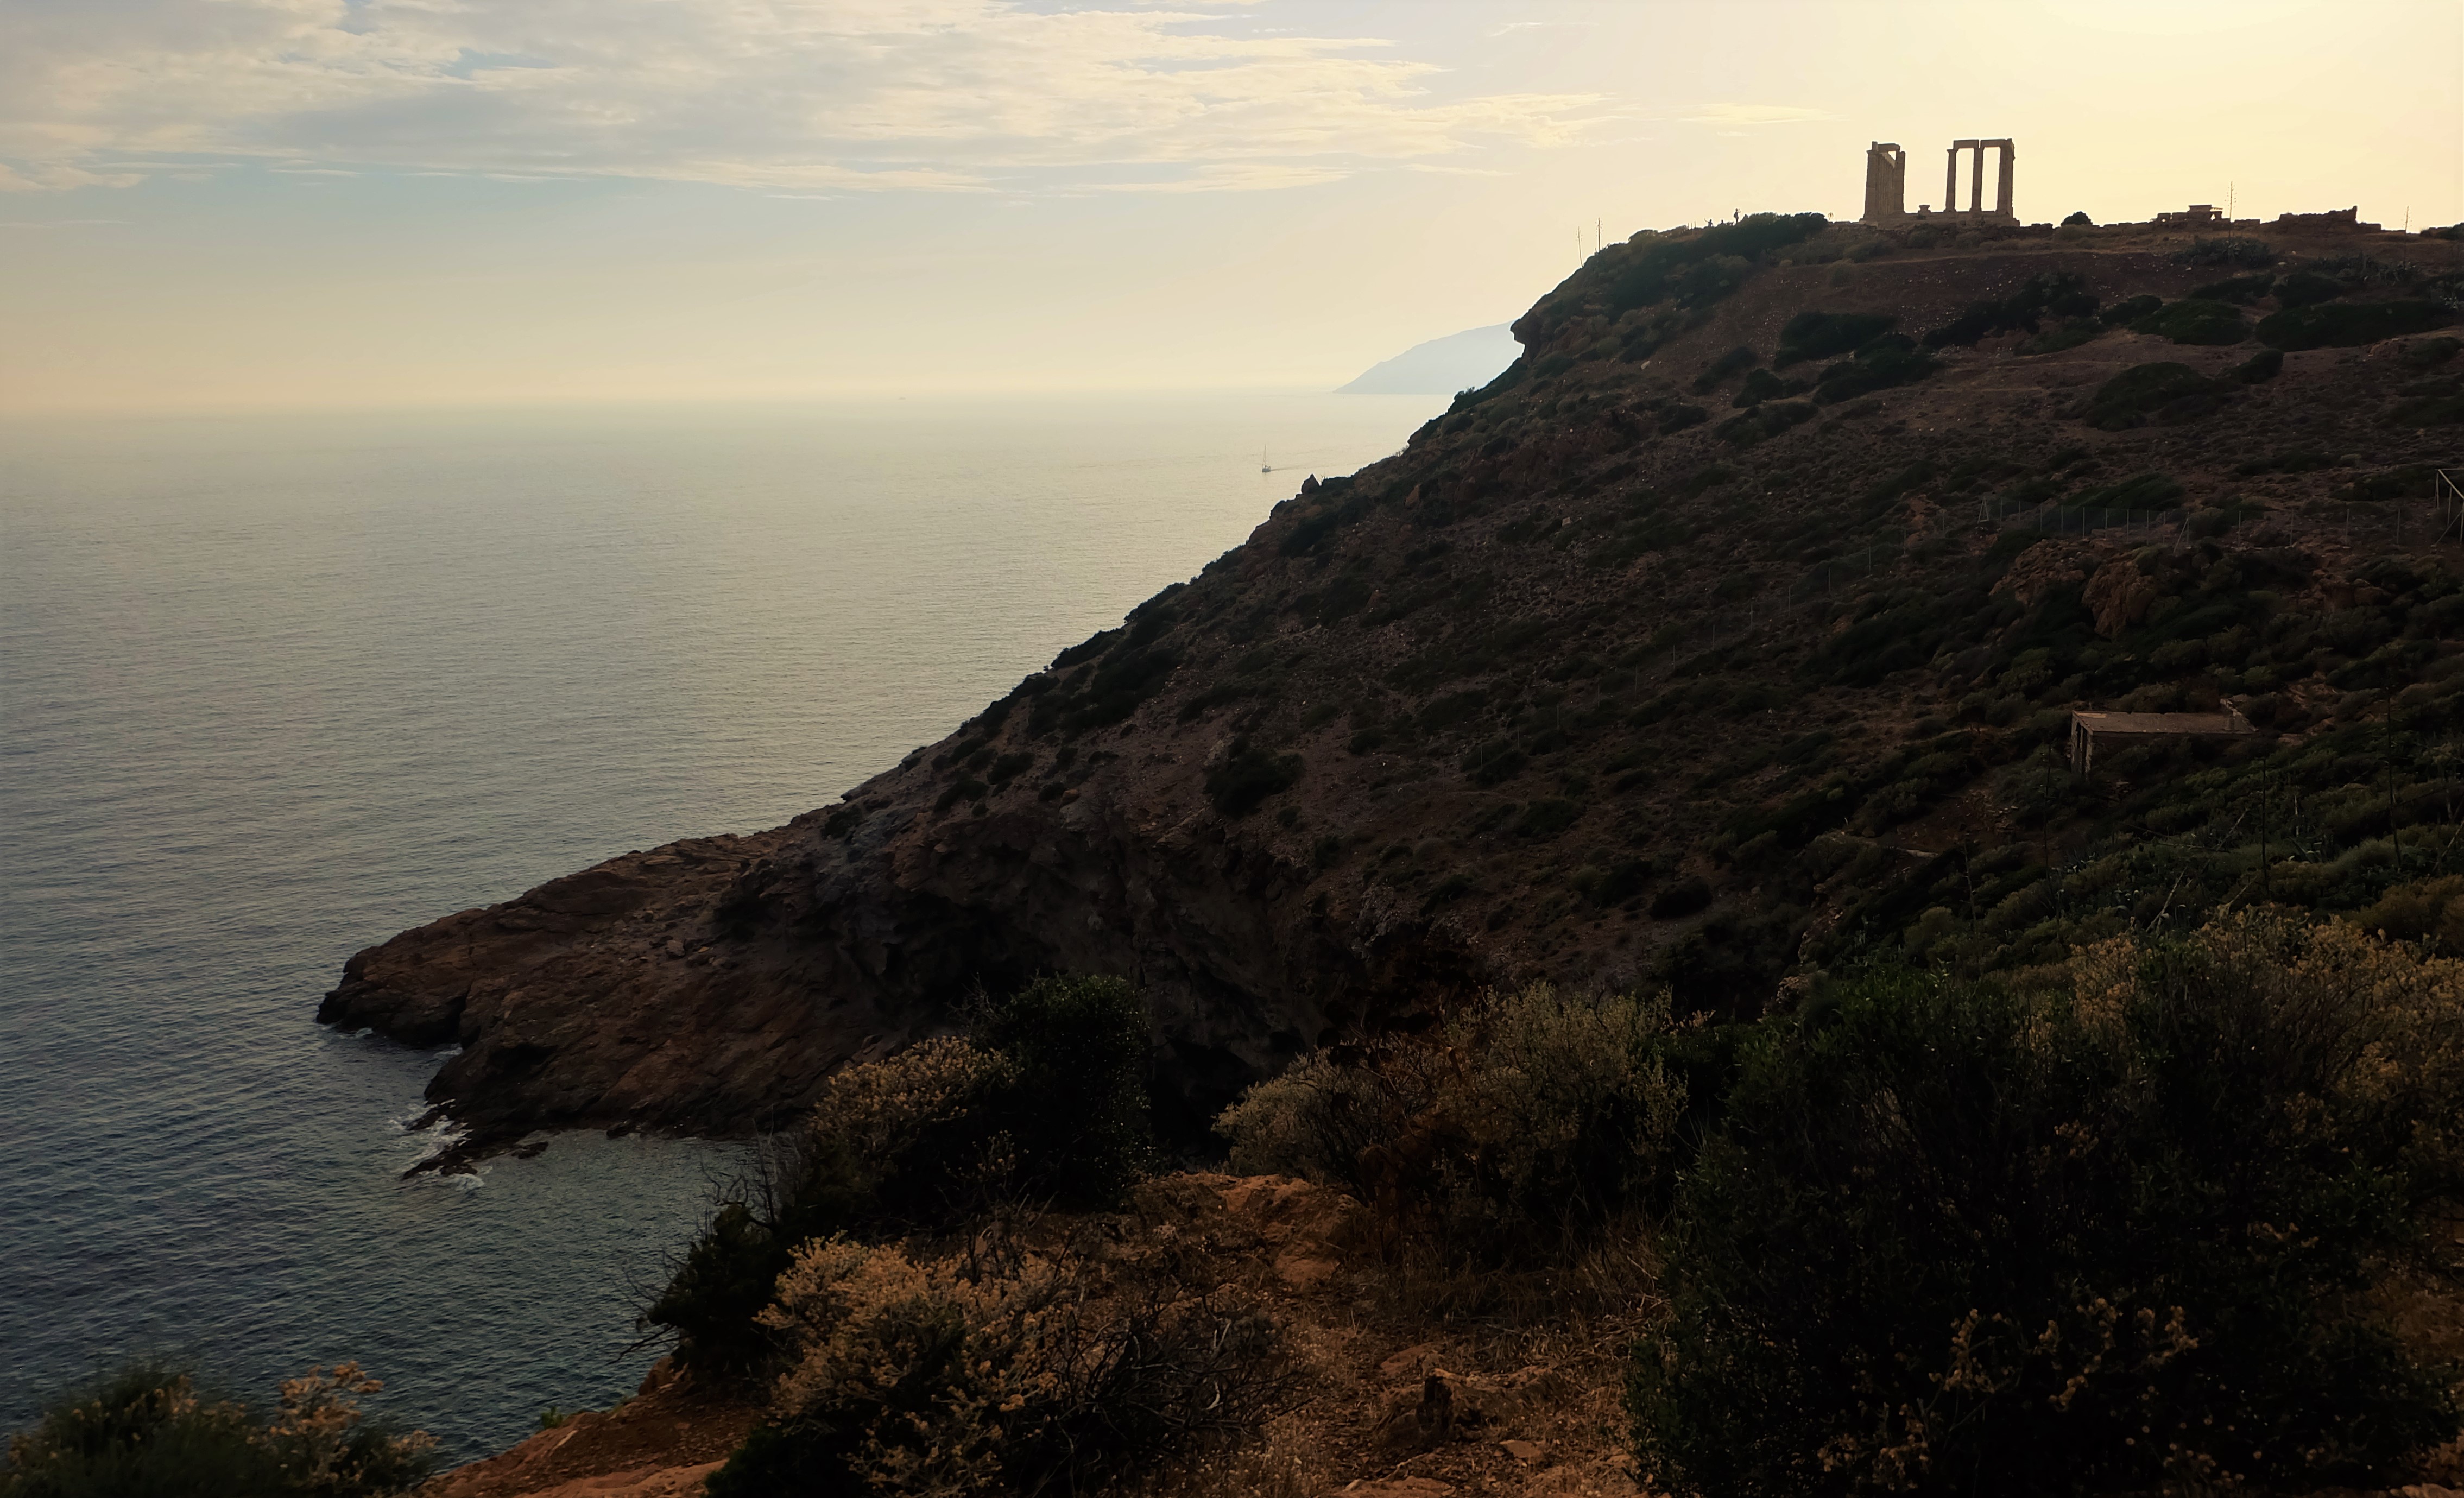 Carry It Like Harry - Watch the sun sets on the Temple of Poseidon at Cape Sounion, Greece